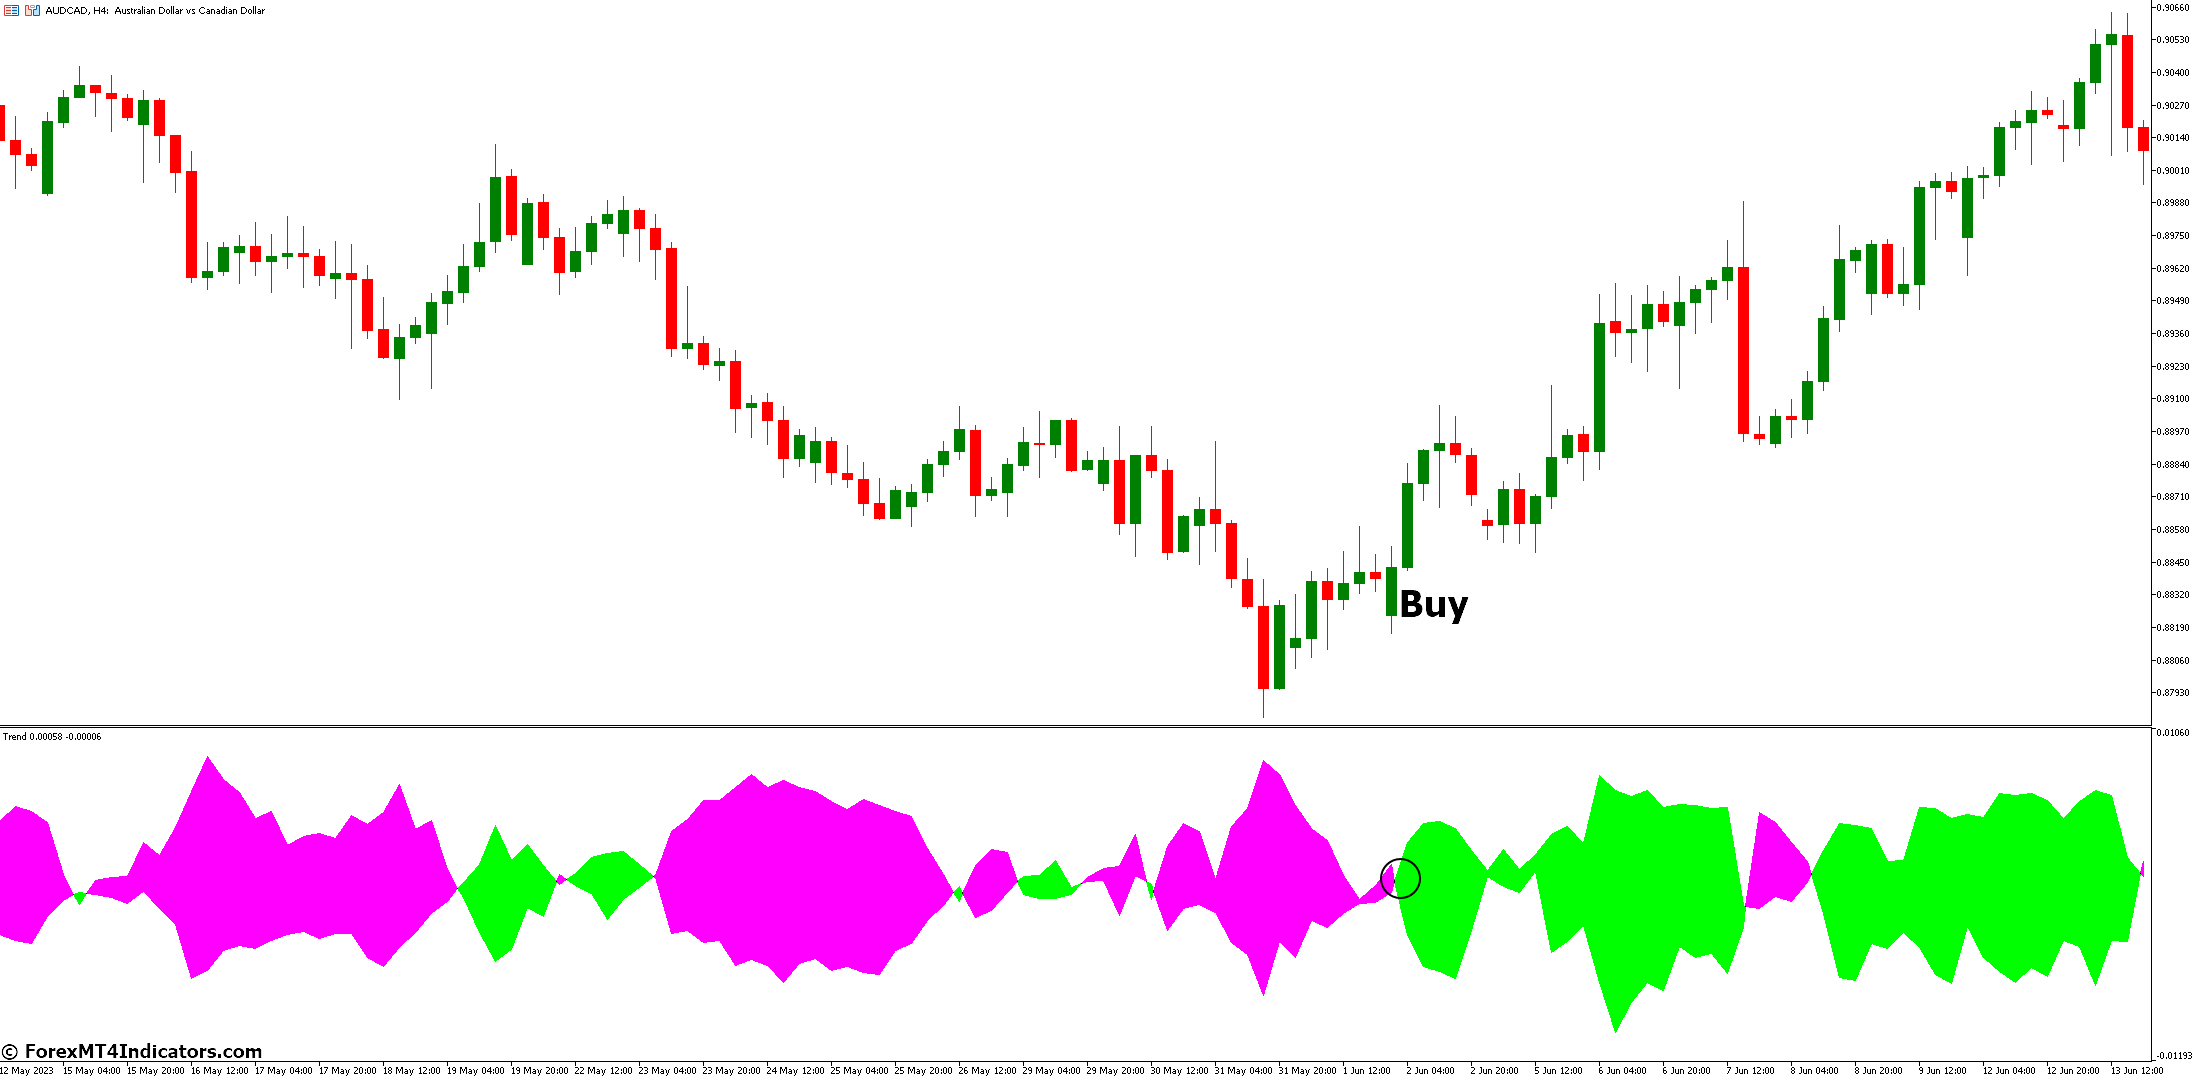 How to Trade with Trend Envelopes Indicator - Buy Entry